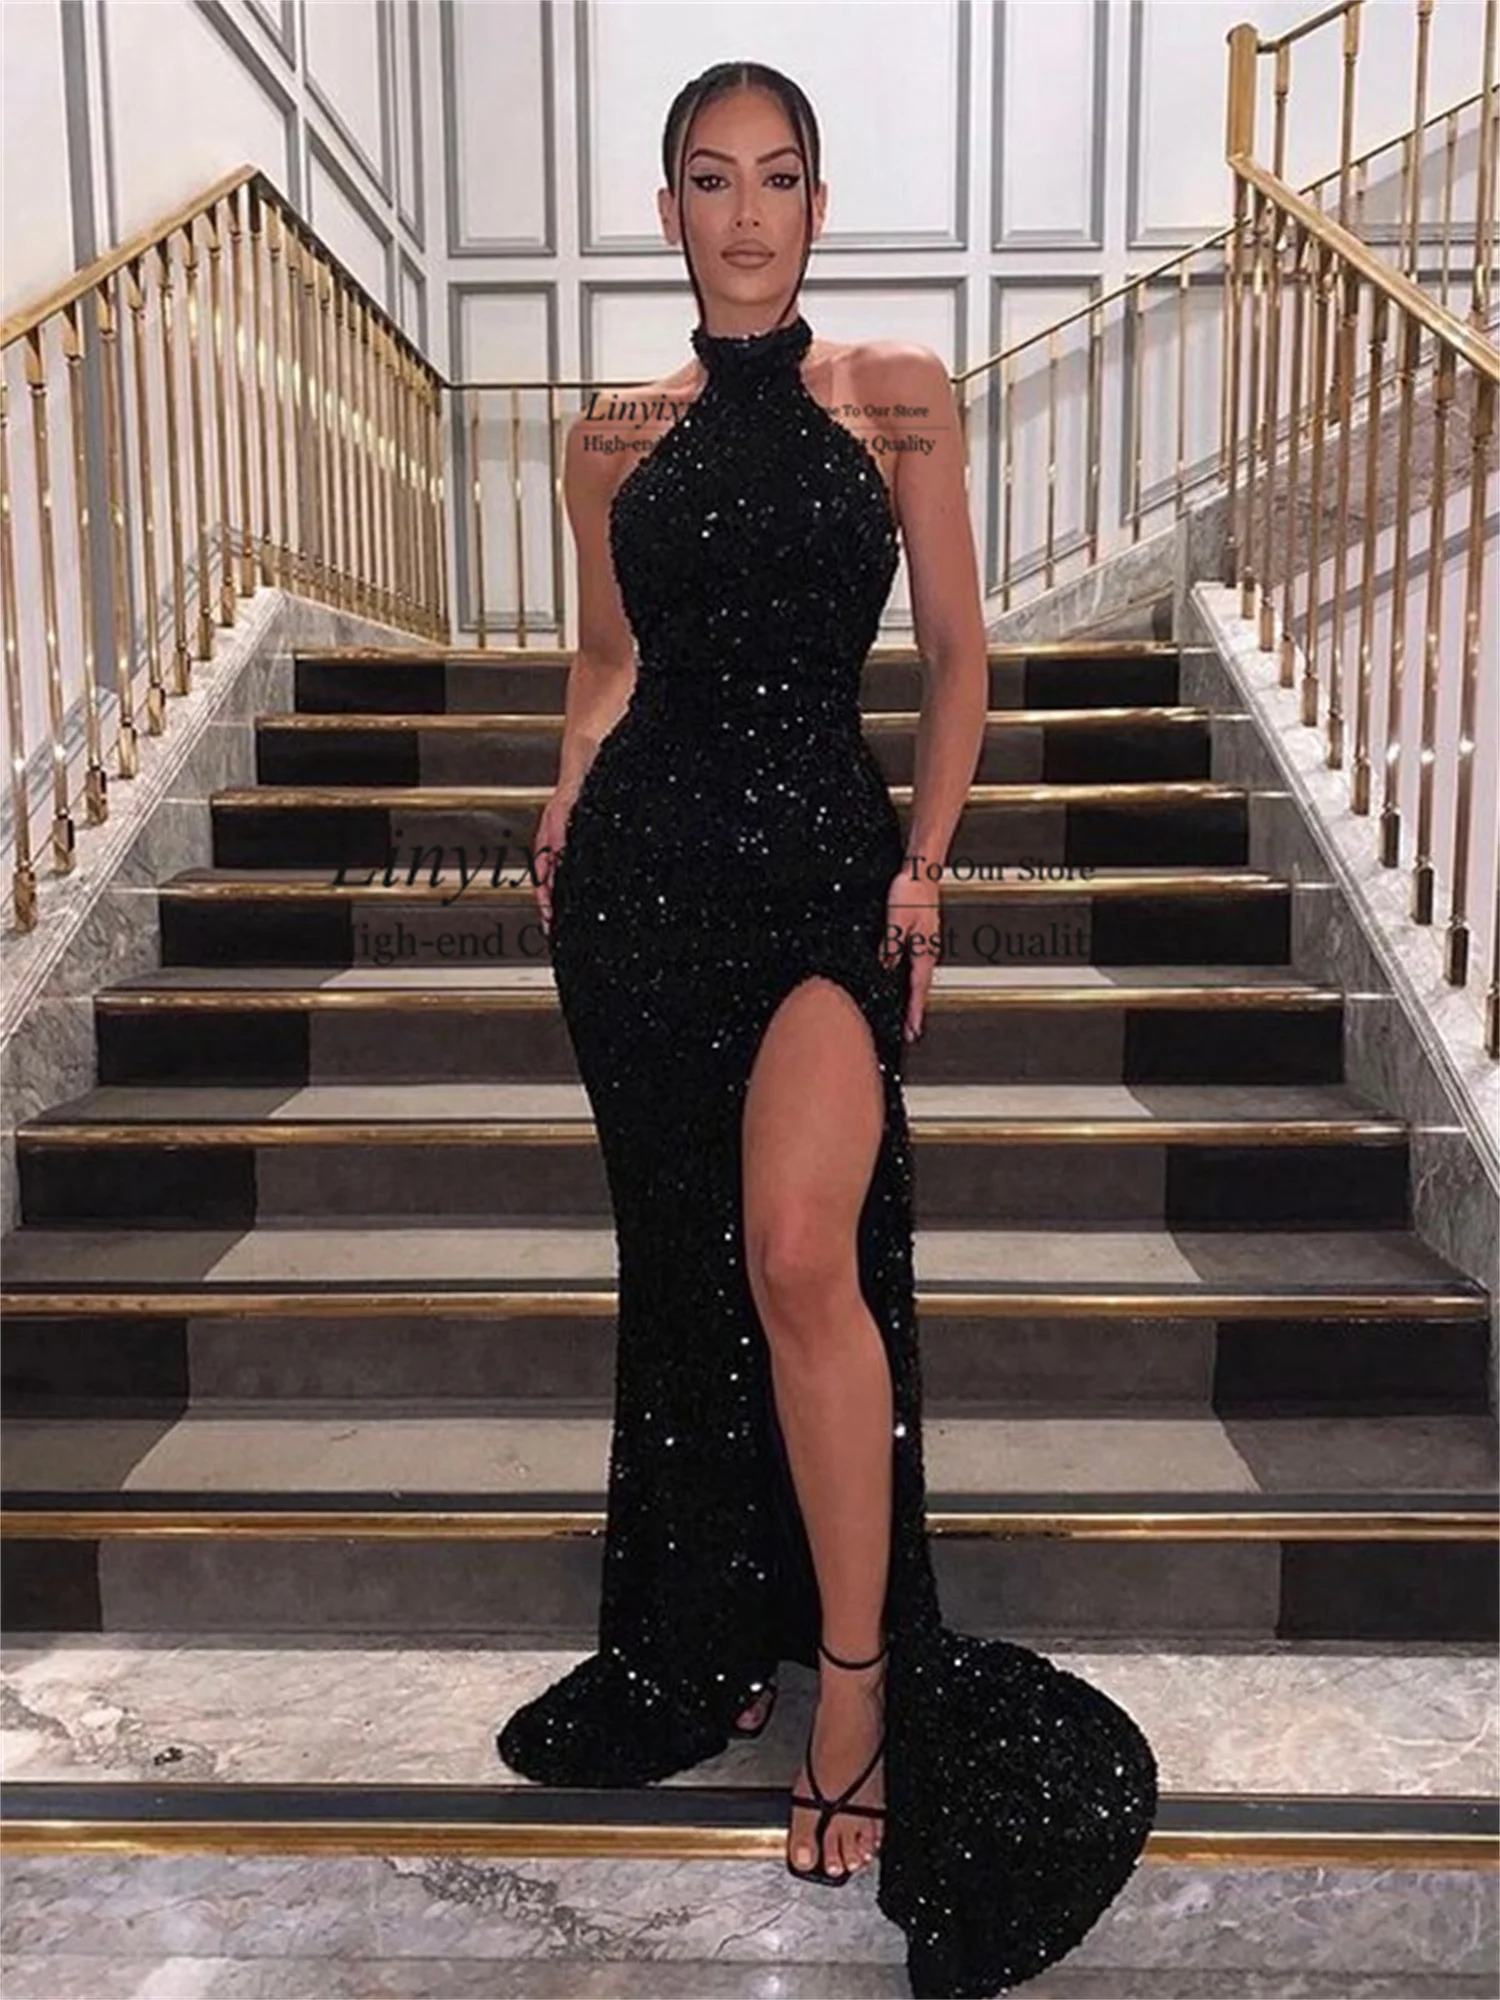 

Sexy Sequined Black Mermaid Prom Dresses Halter Neck Sleeveless Formal Evening Party Gown Side Split Court Train Robes de soirée